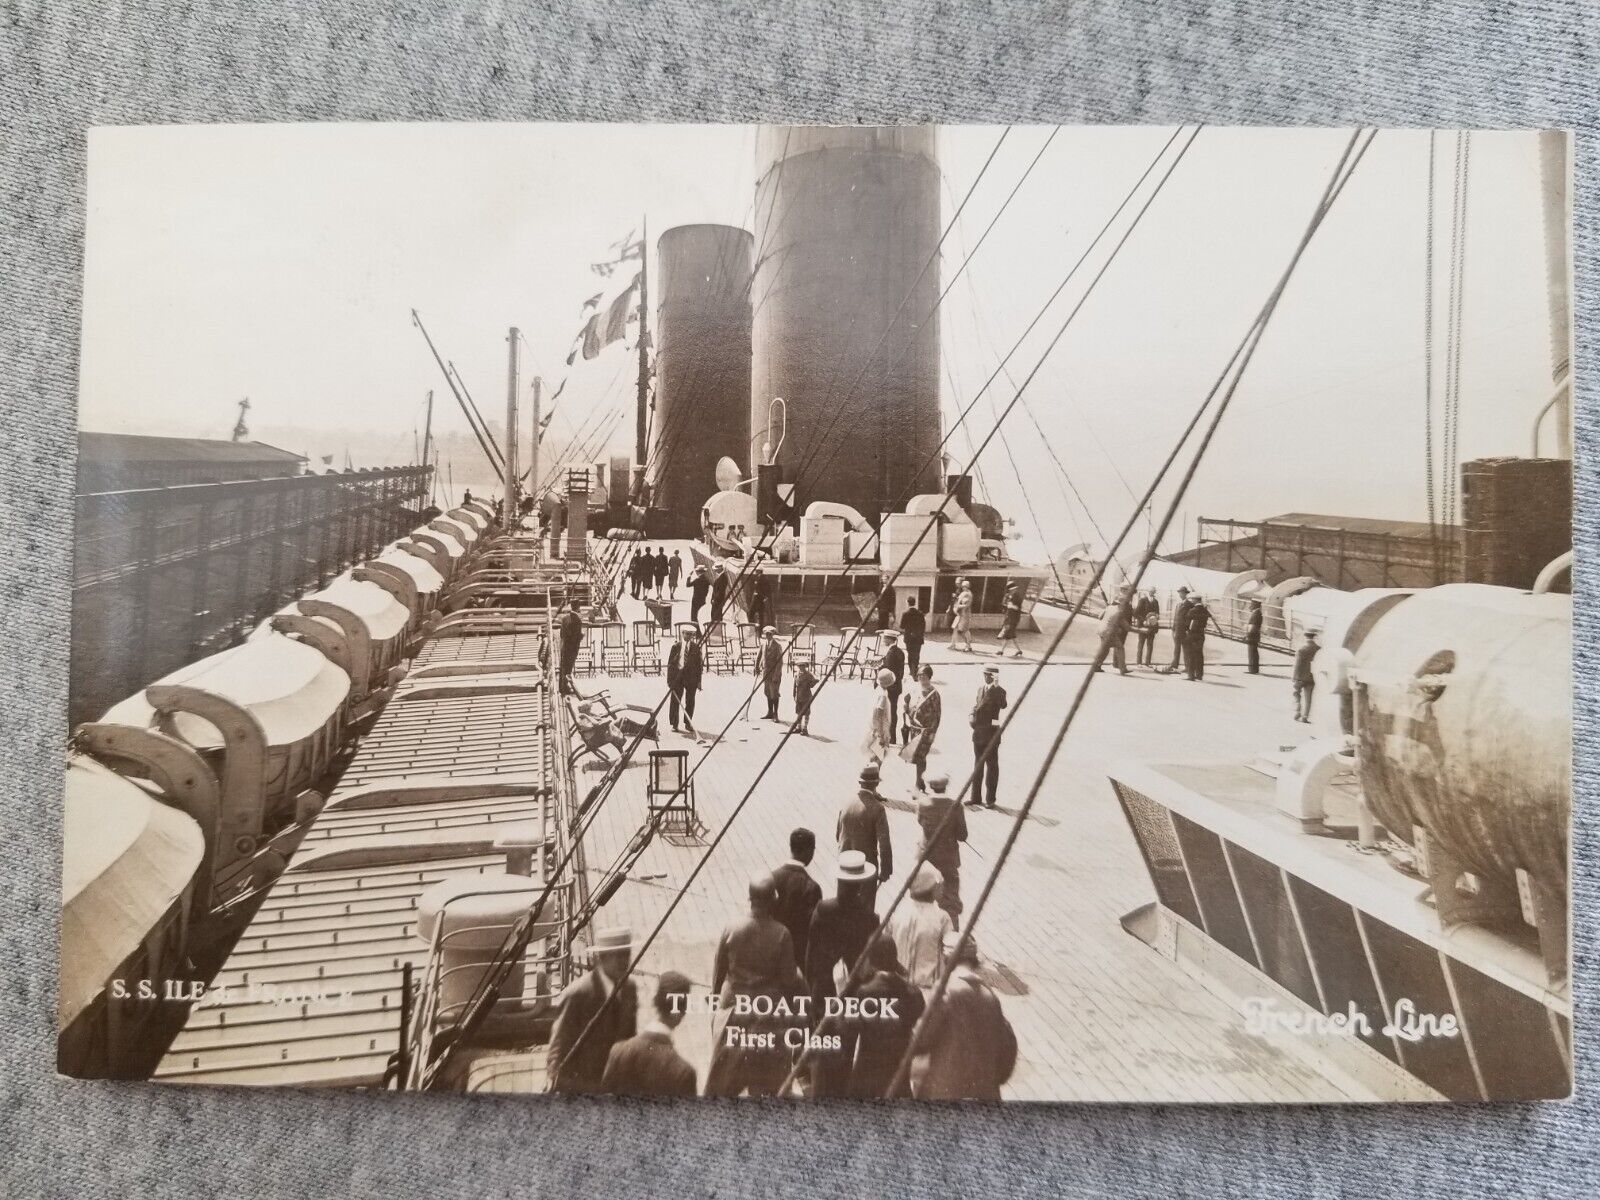 RPPC SS Ile de France Luxury Liner Steamer Boat Deck First Class French Line